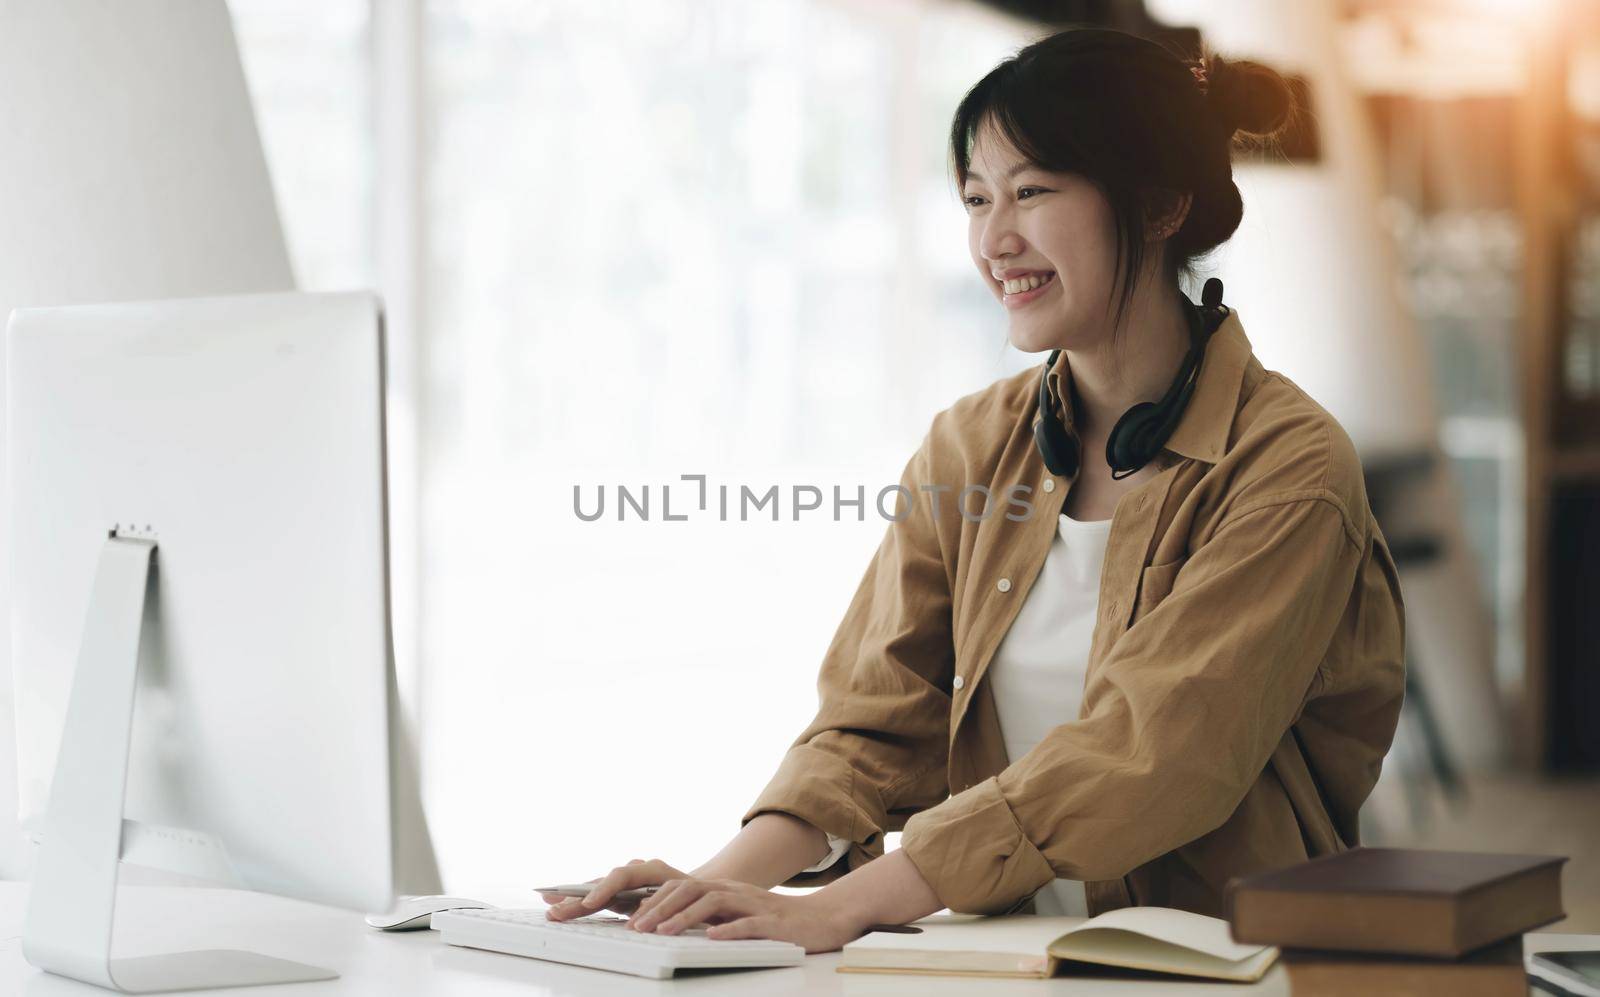 Head shot portrait smiling asian woman wearing headphones posing for photo at workplace, happy excited female wearing headset looking at laptop, sitting at desk with laptop, making video call.